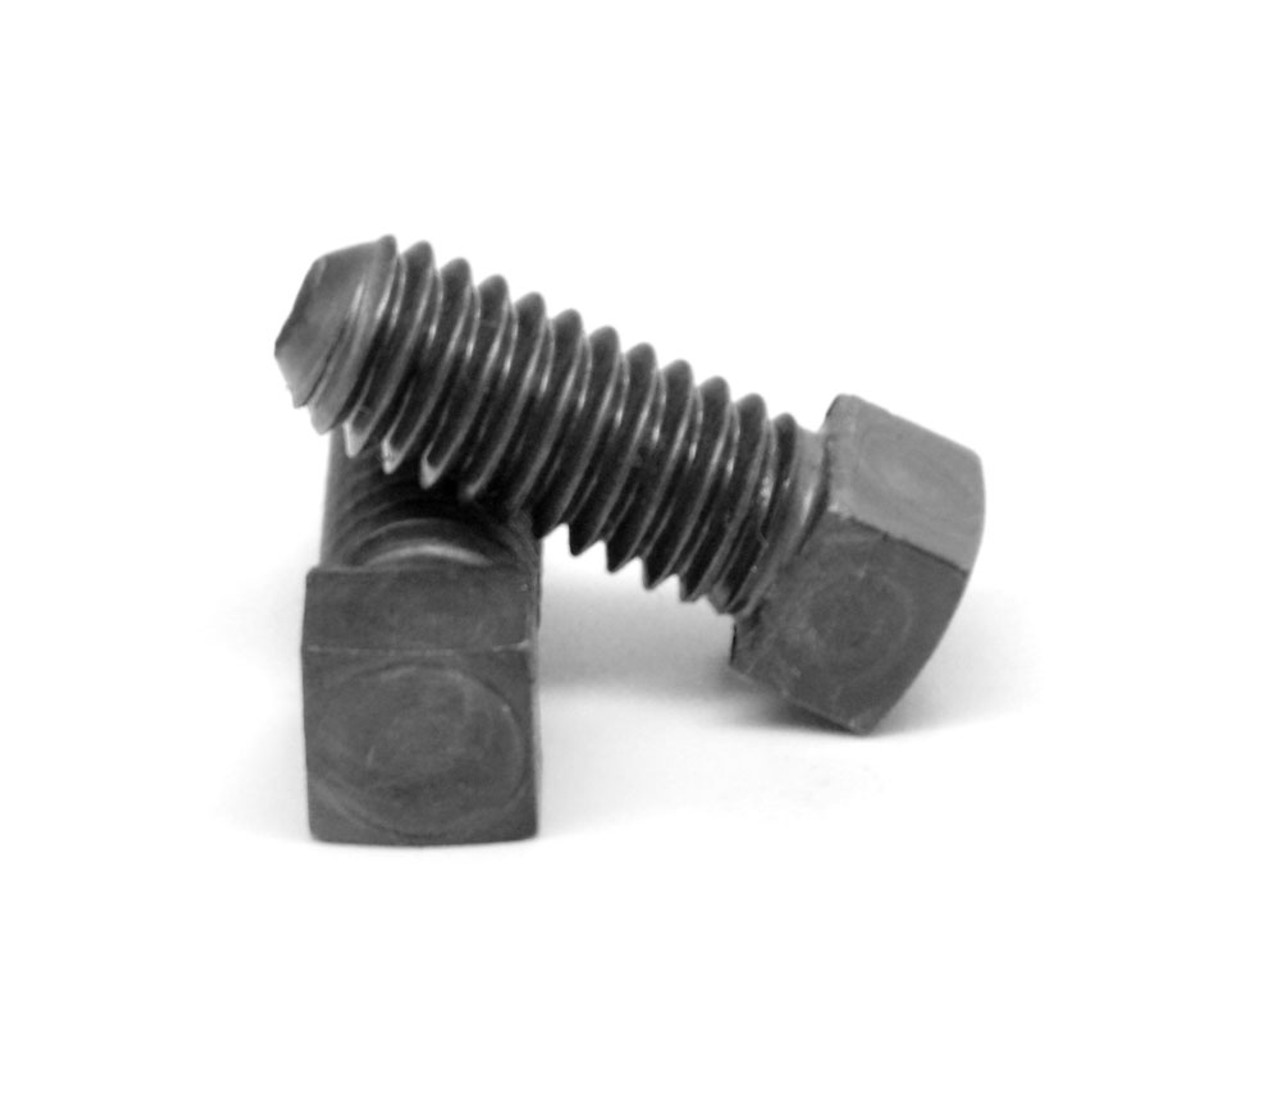 7/16"-14 x 2" (FT) Coarse Thread Square Head Set Screw Cup Point Low Carbon Steel Case Hardened Plain Finish